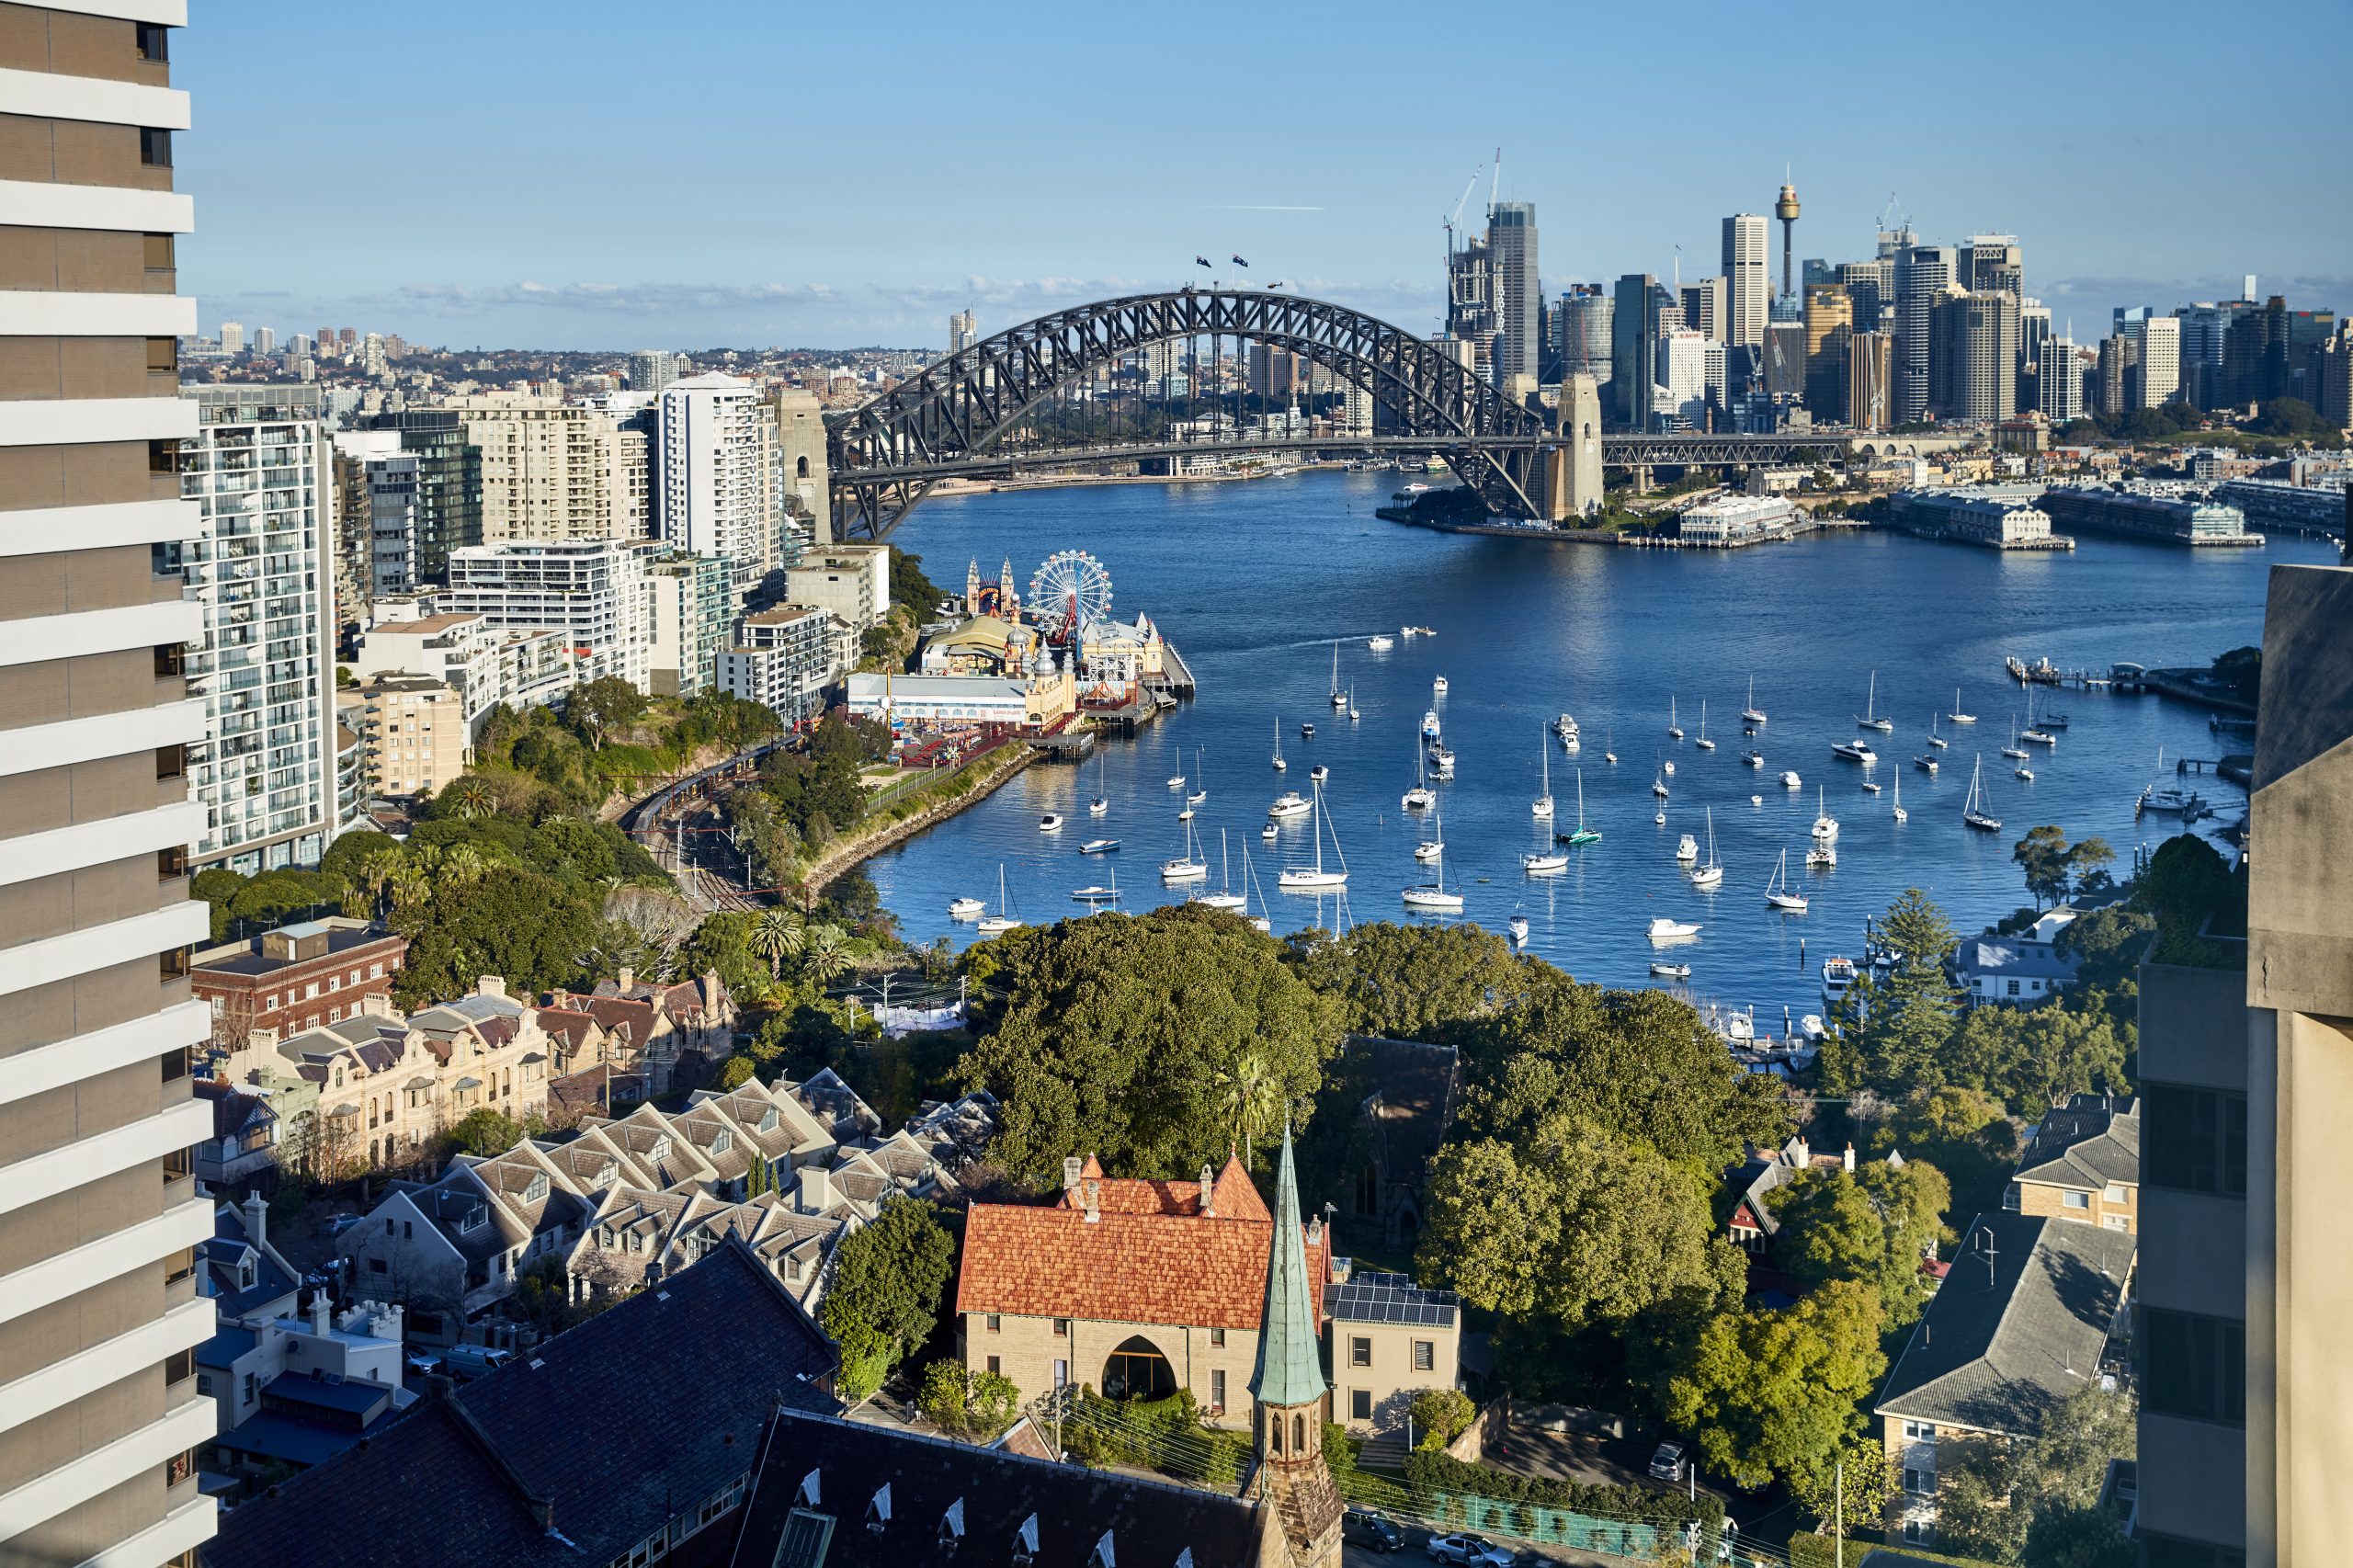 North Sydney, our official new home